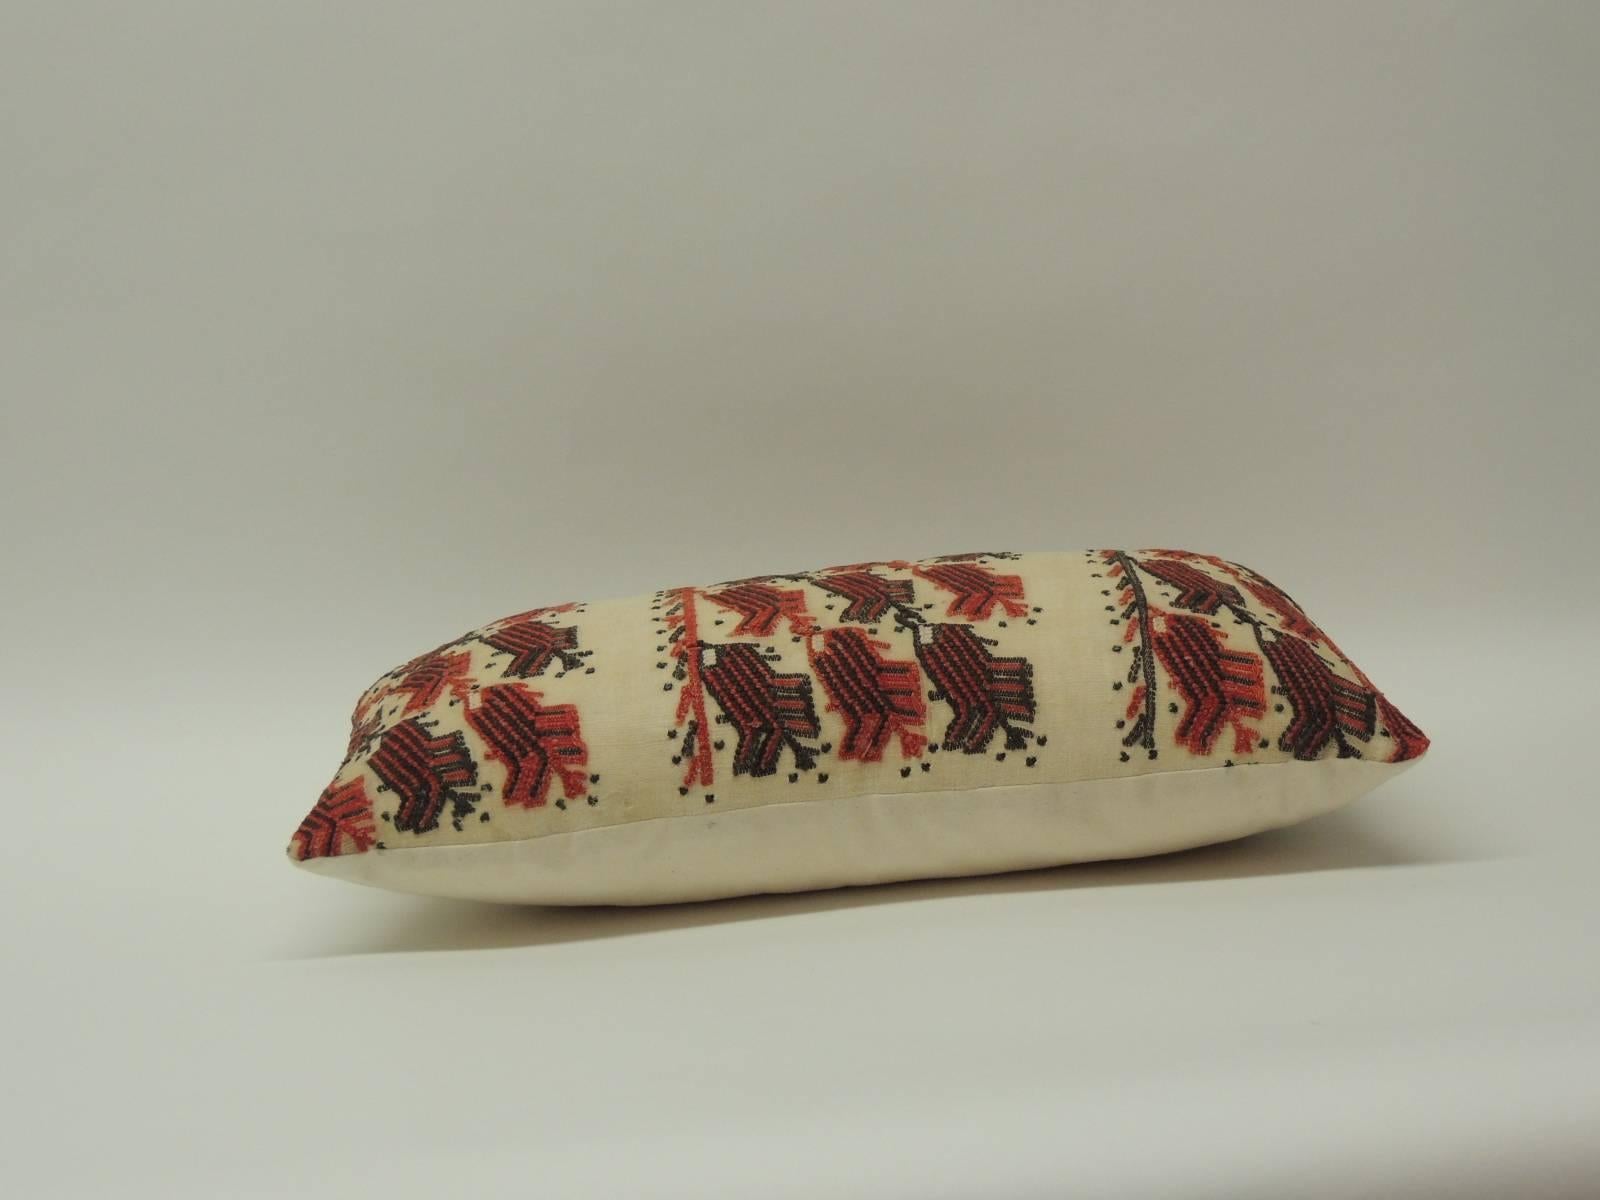 Hand-Crafted 19th Century Turkish Embroidery Lumbar Decorative Pillow.